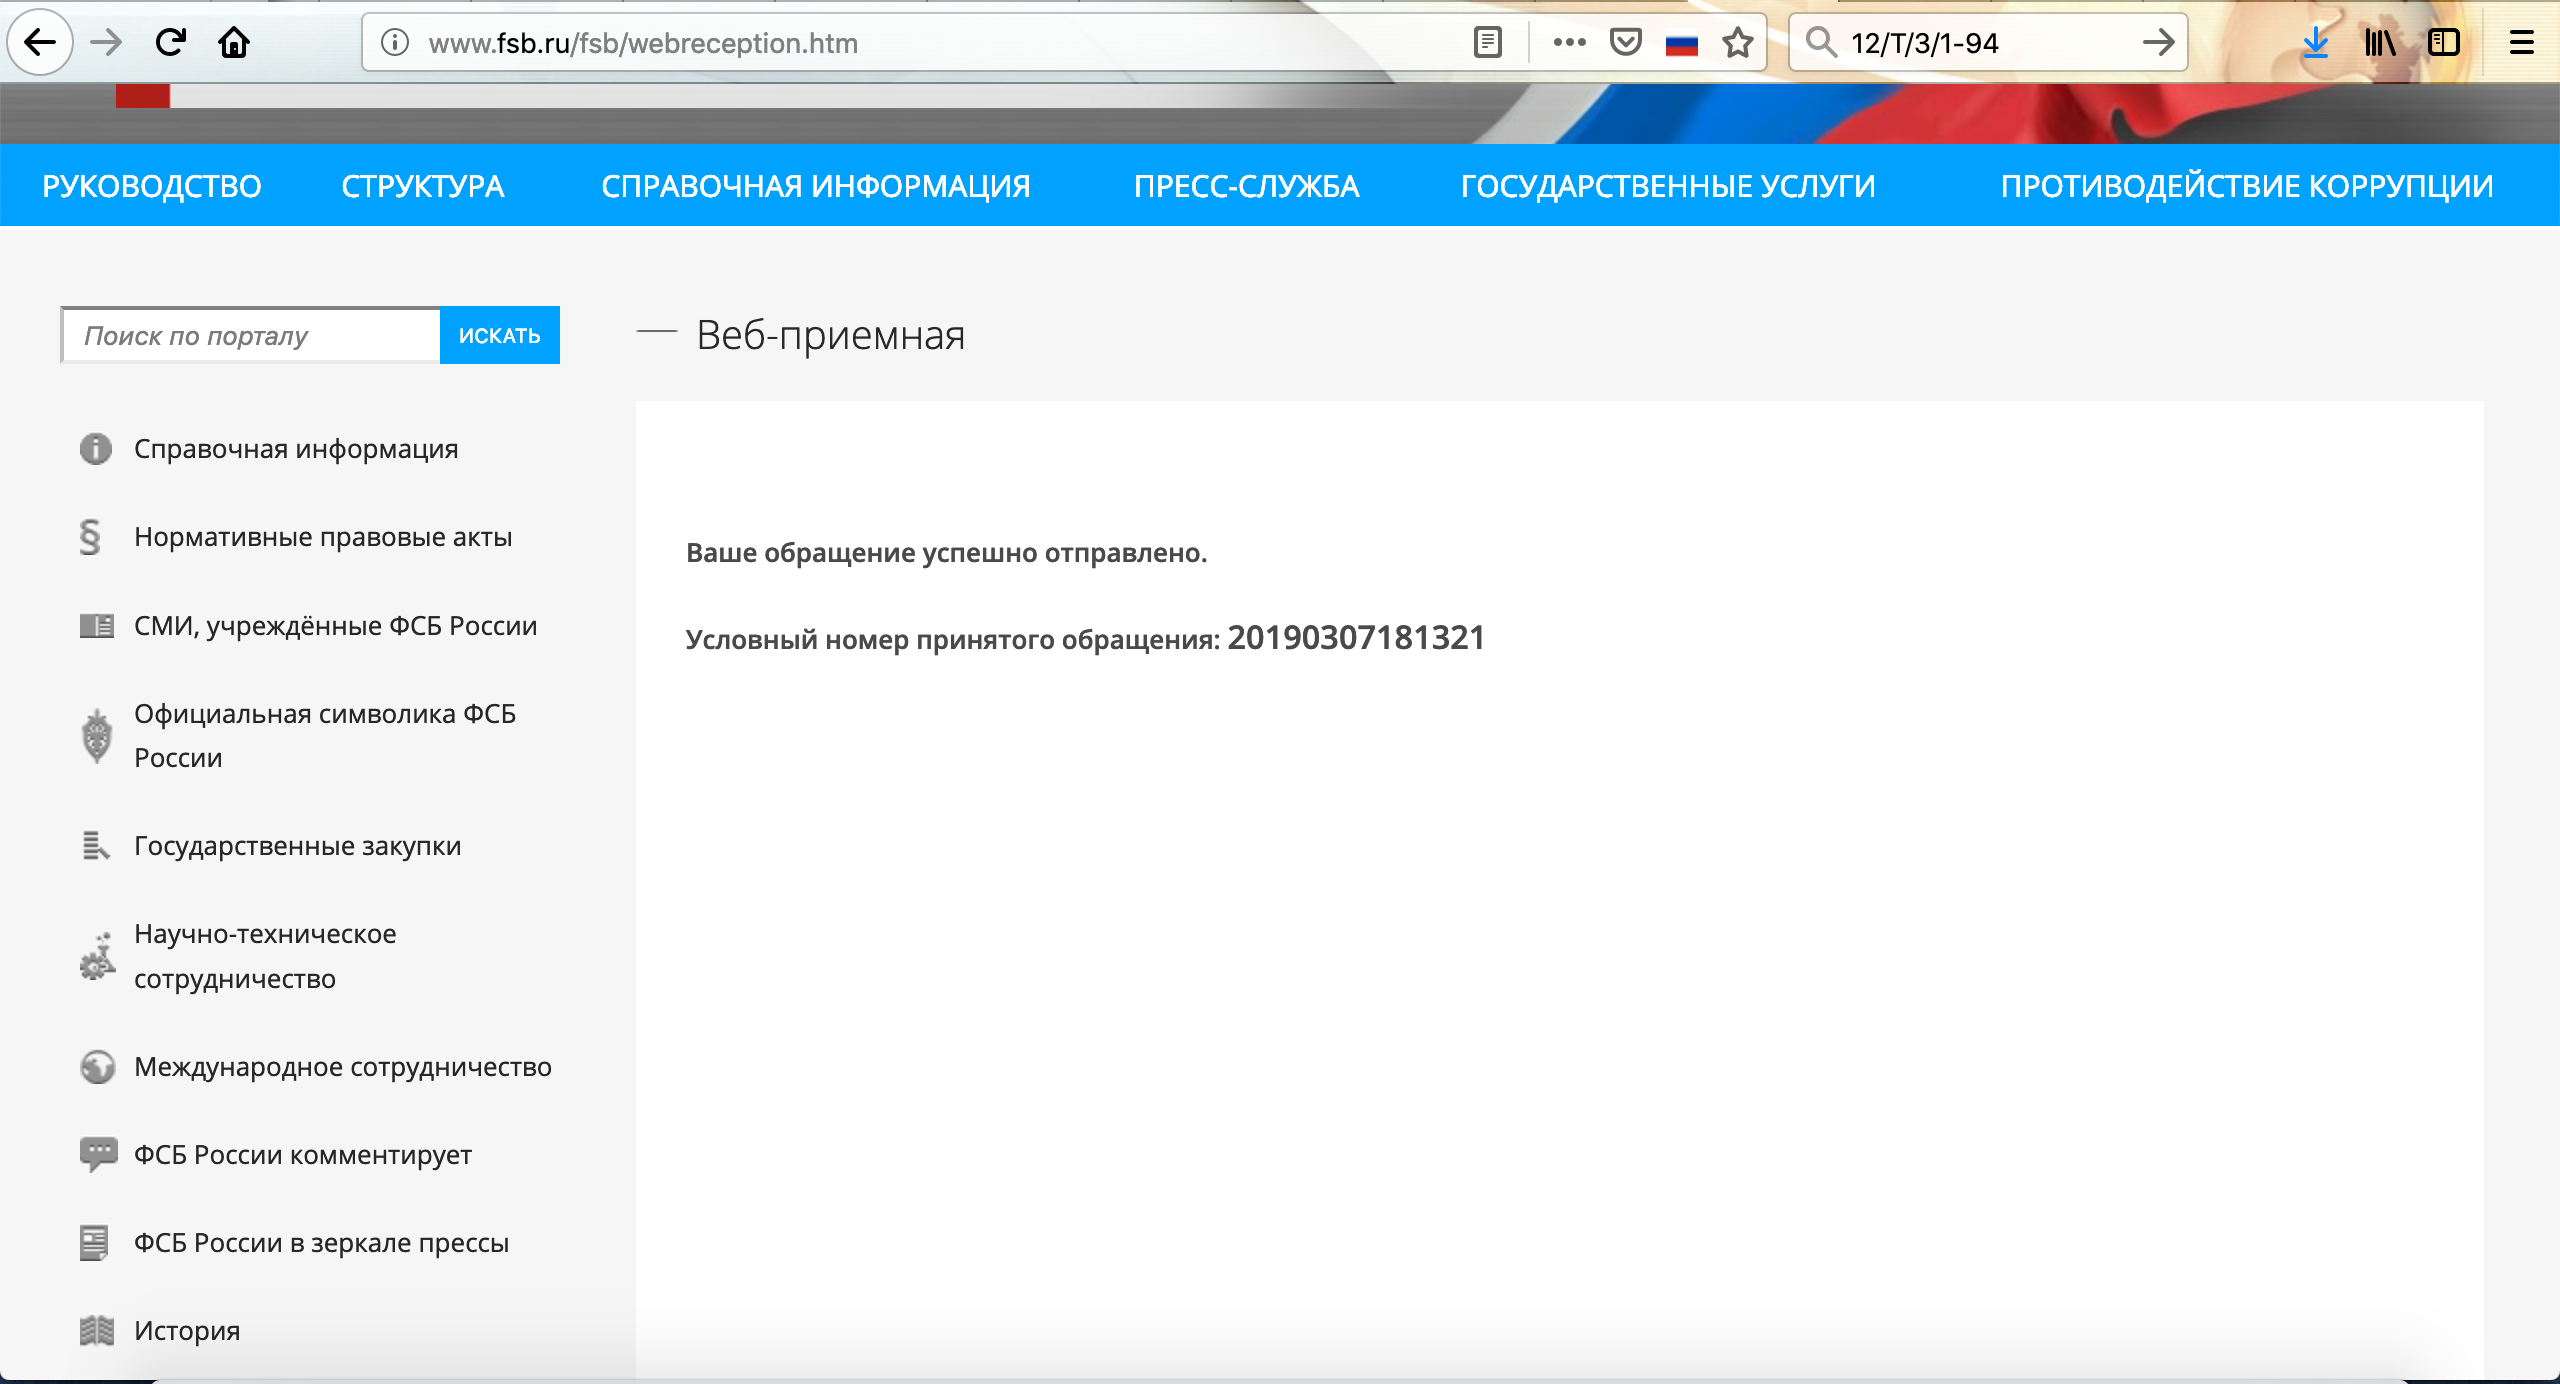 How Protonmail is getting censored by FSB in Russia - 10